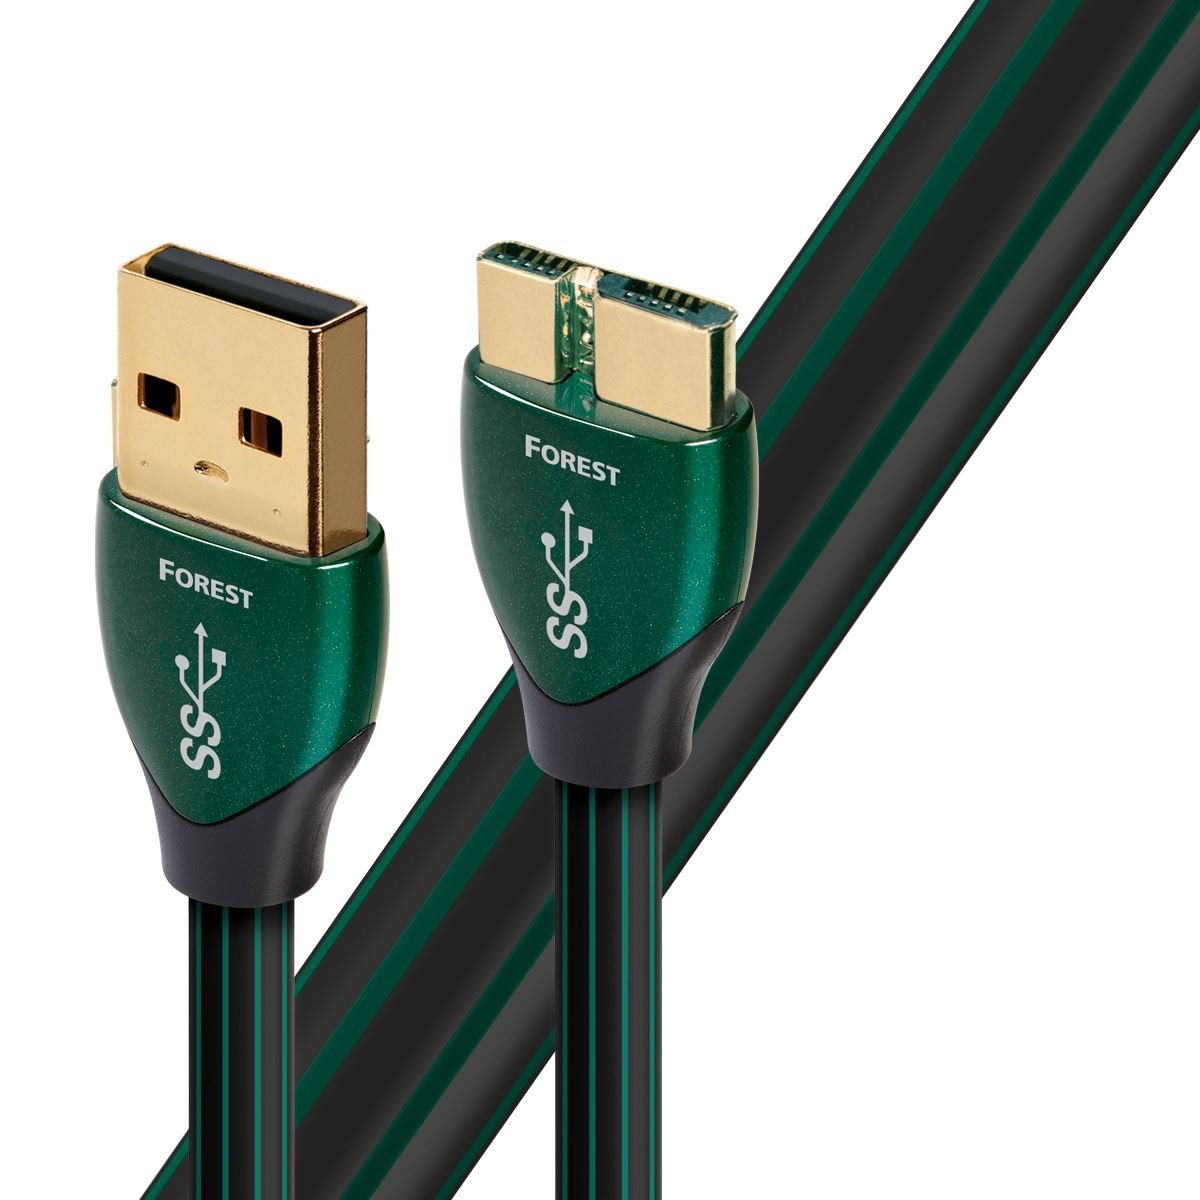 AUDIOQUEST_Forest_3M_USB3_micro_O.5%_silver._Hard-cell_foam_Metal-layer_noise_dissipation_Jacket_-_black_PVC_with_green_stripes._3.0M_FOREST_USB_3.0_MICRO 1921